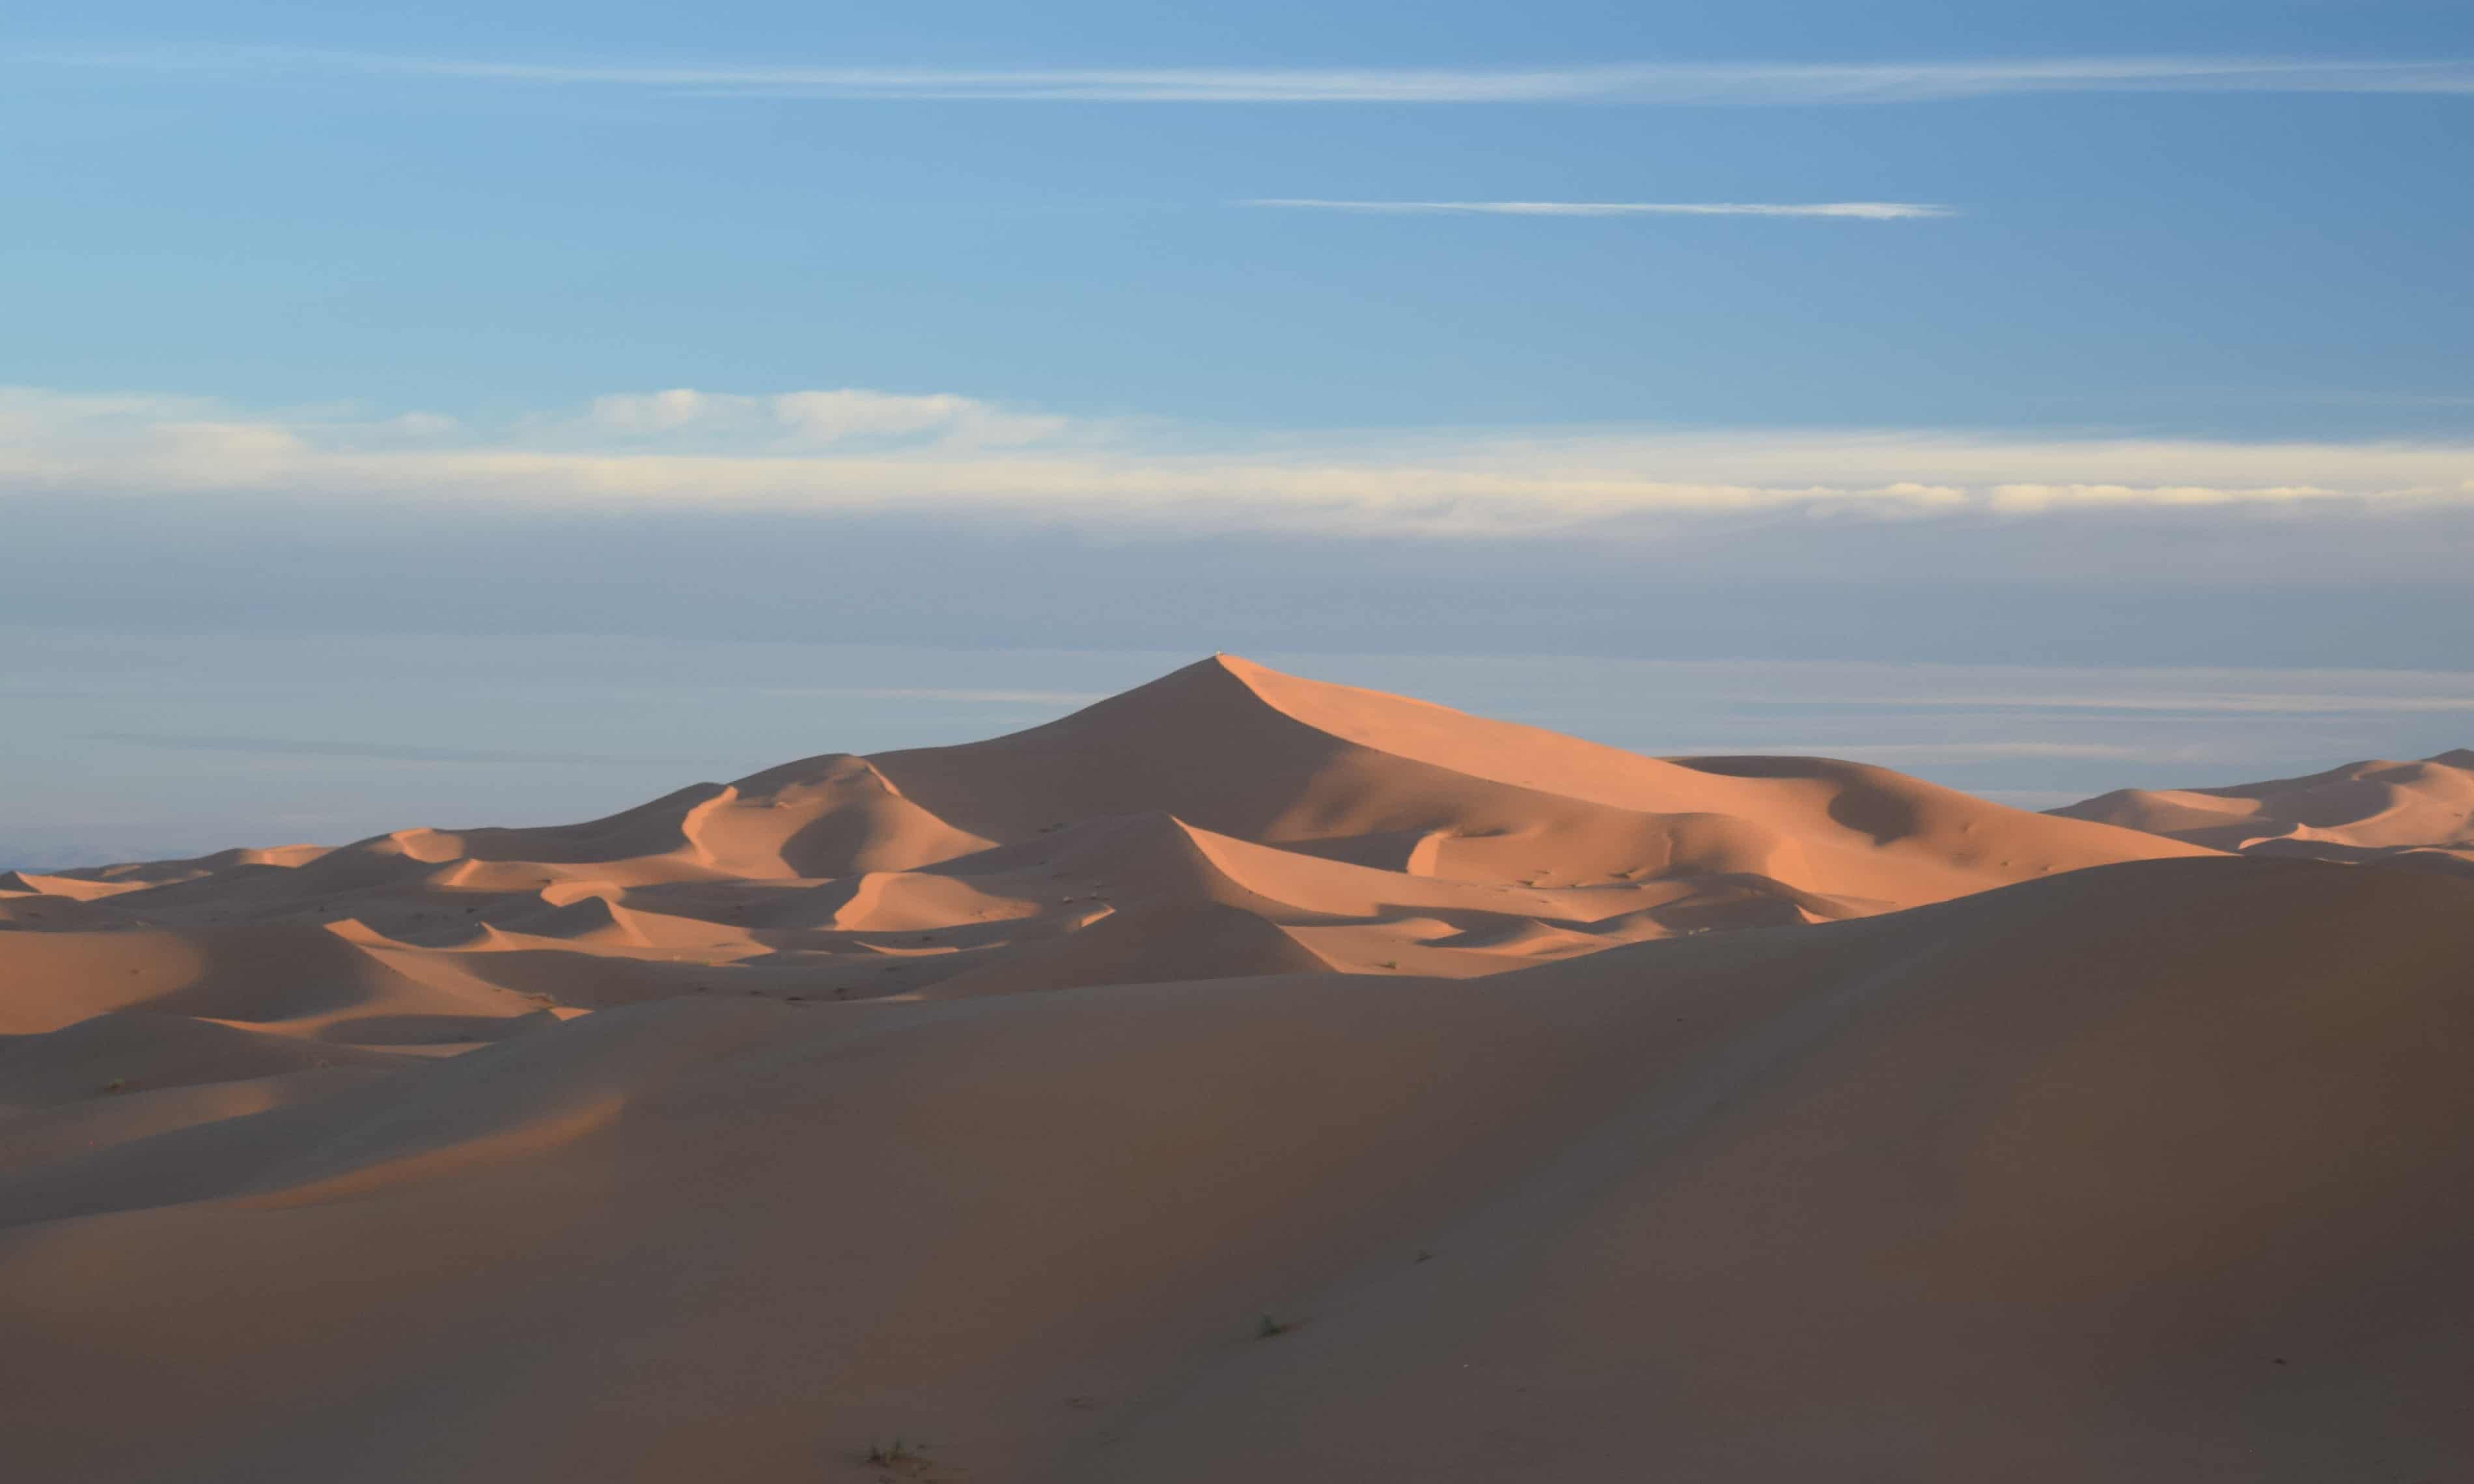 Scientists unearth mysteries of giant, moving Moroccan star dune (theguardian.com)